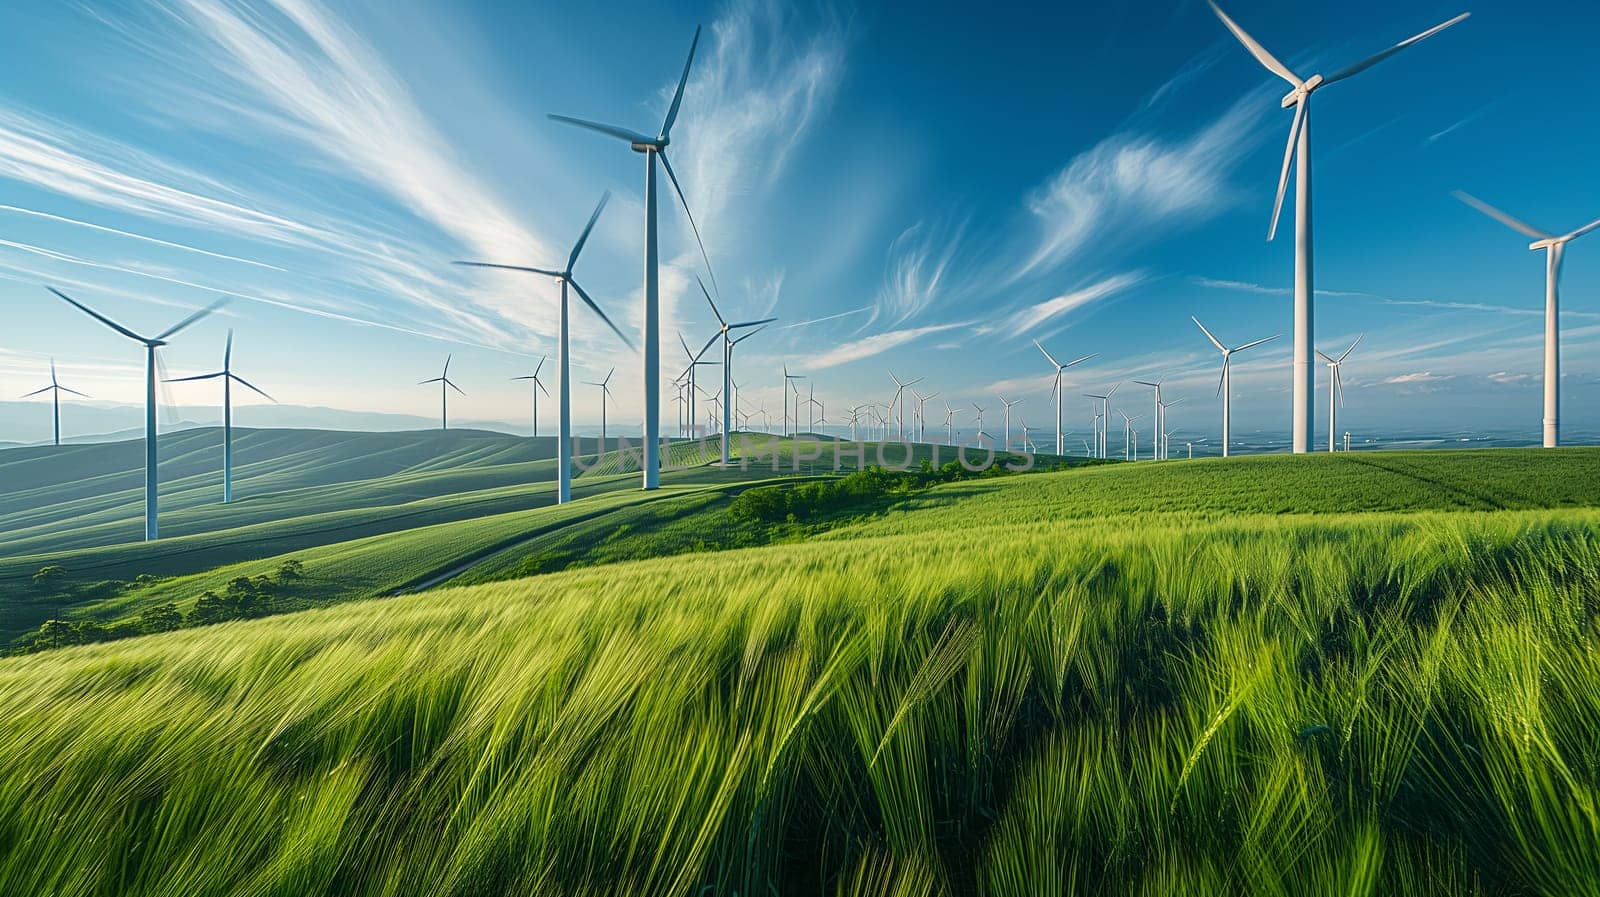 Tall wind turbines tower above a vibrant green field, their blades spinning in the gentle twilight breeze, harmonizing with natures energy - Generative AI